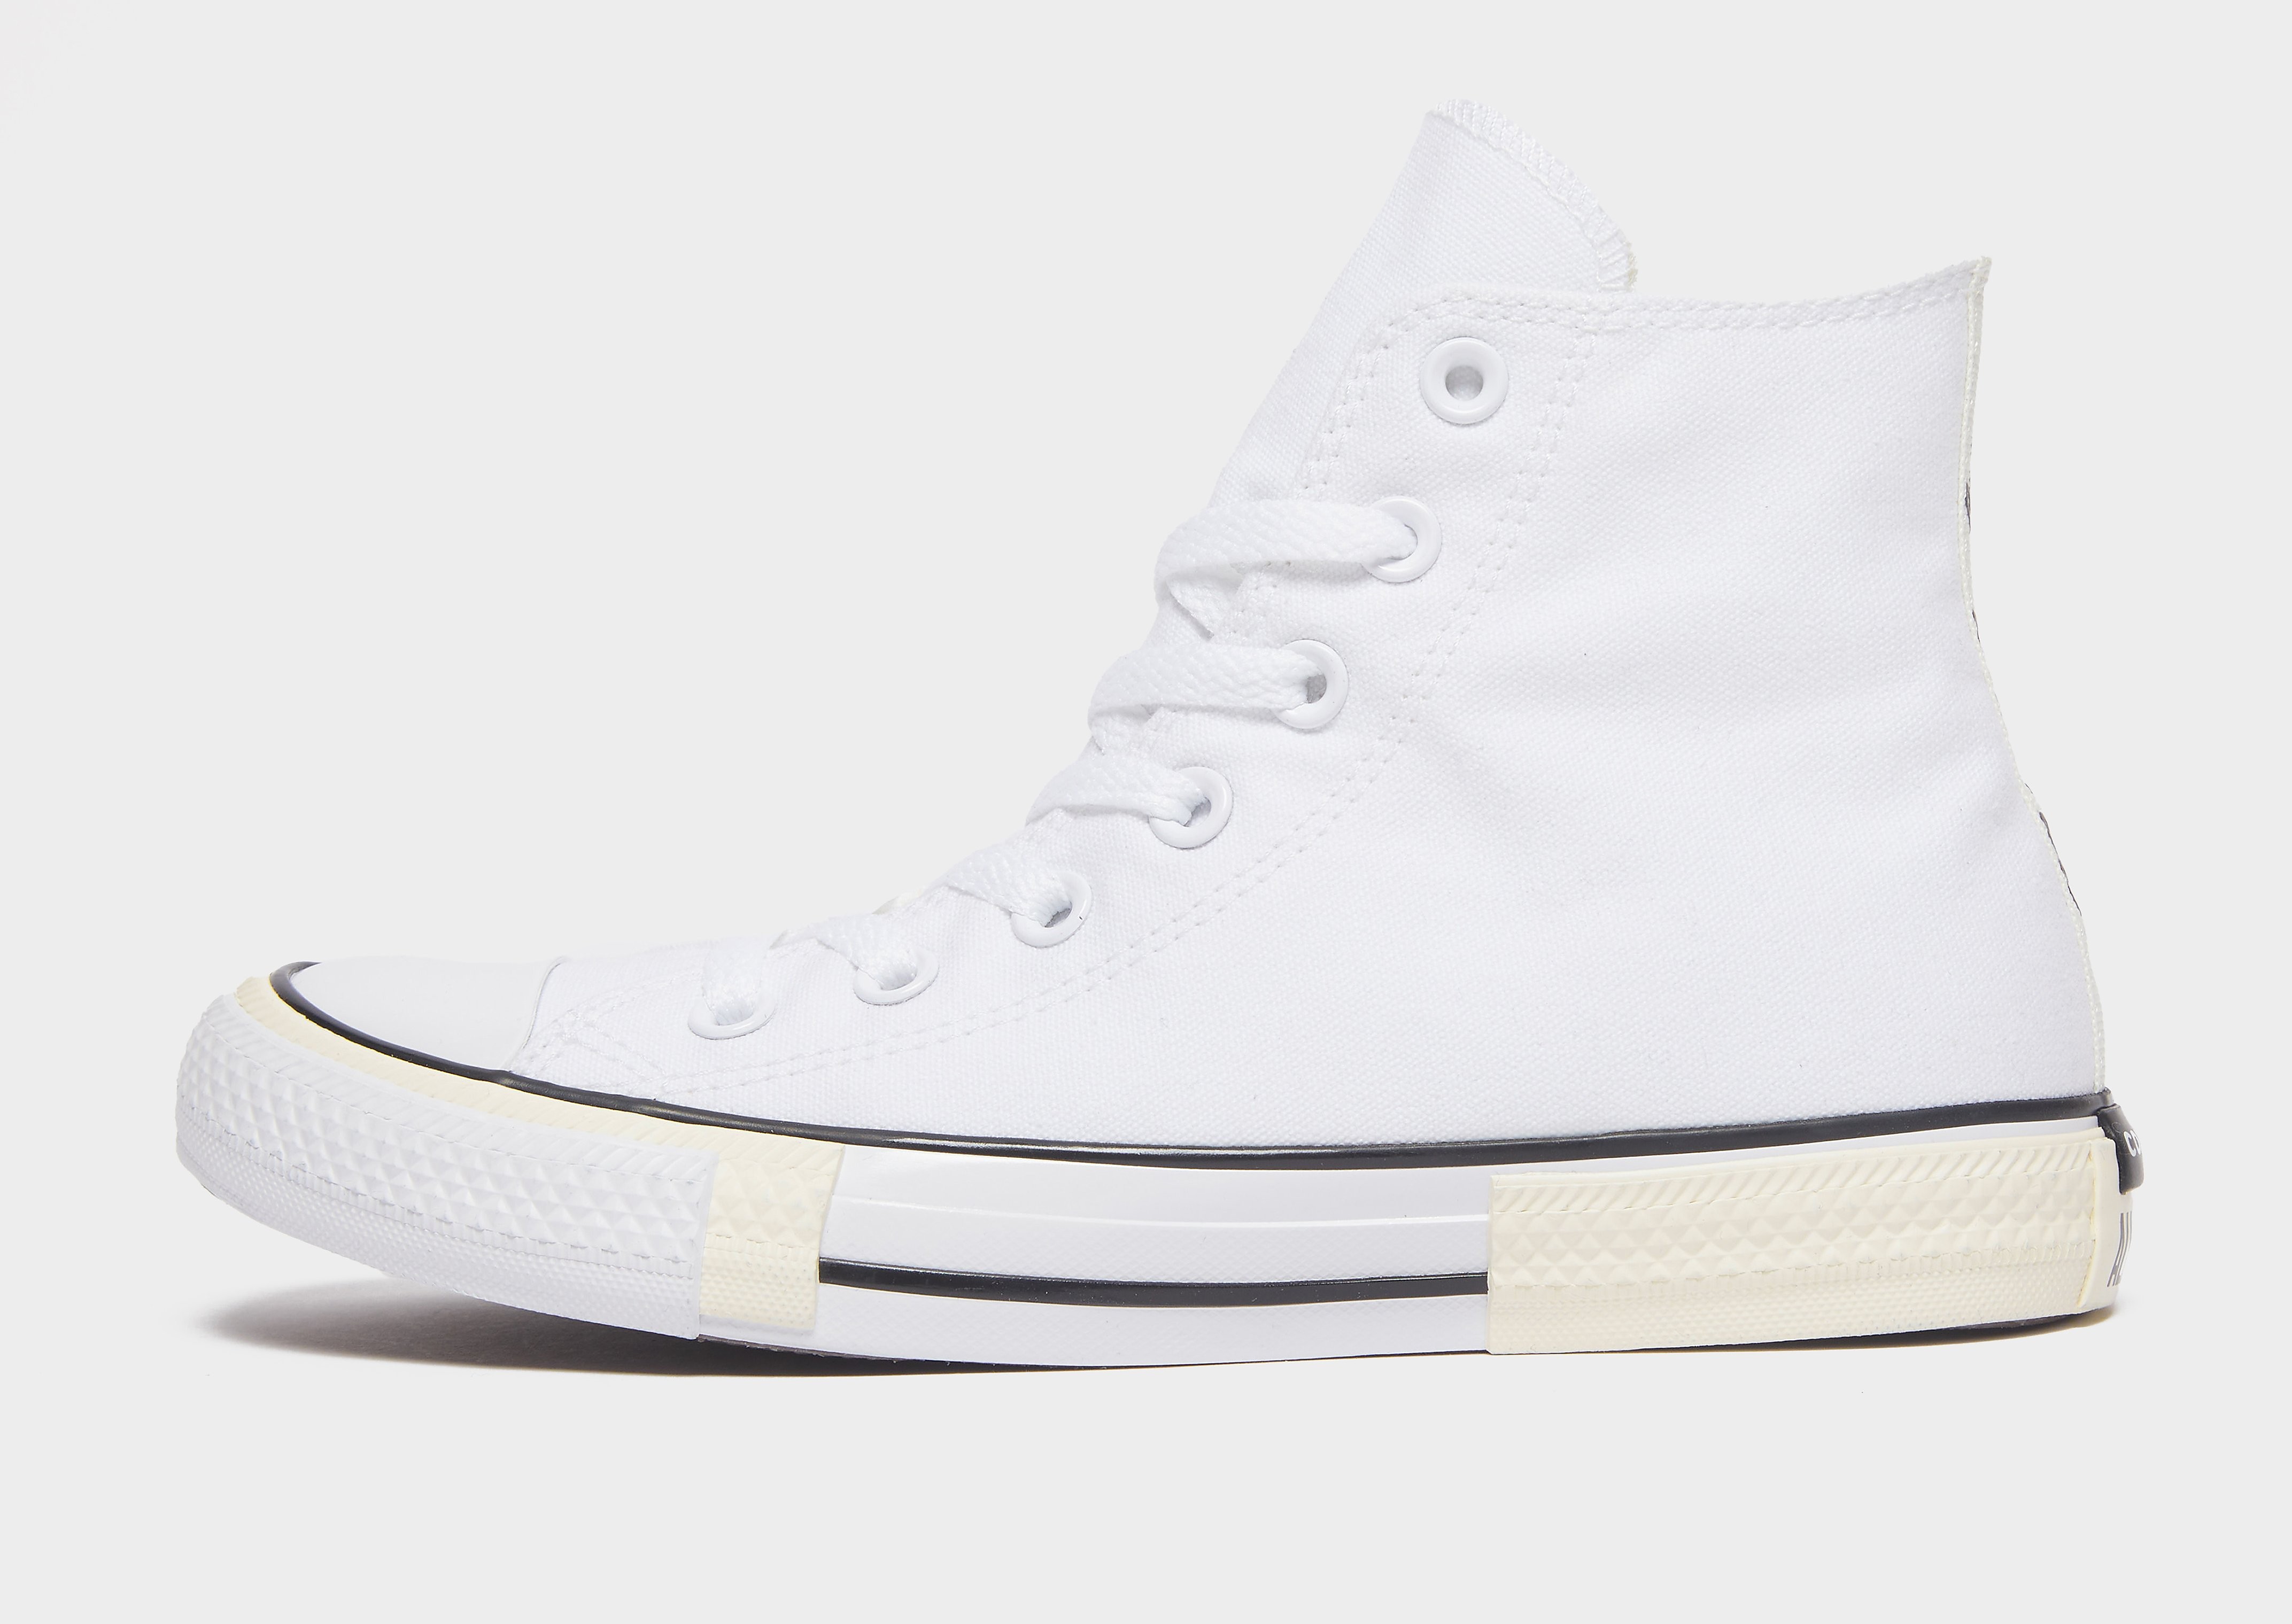 Converse All Star Hi GORE-TEX - Only at JD - White - Womens, White